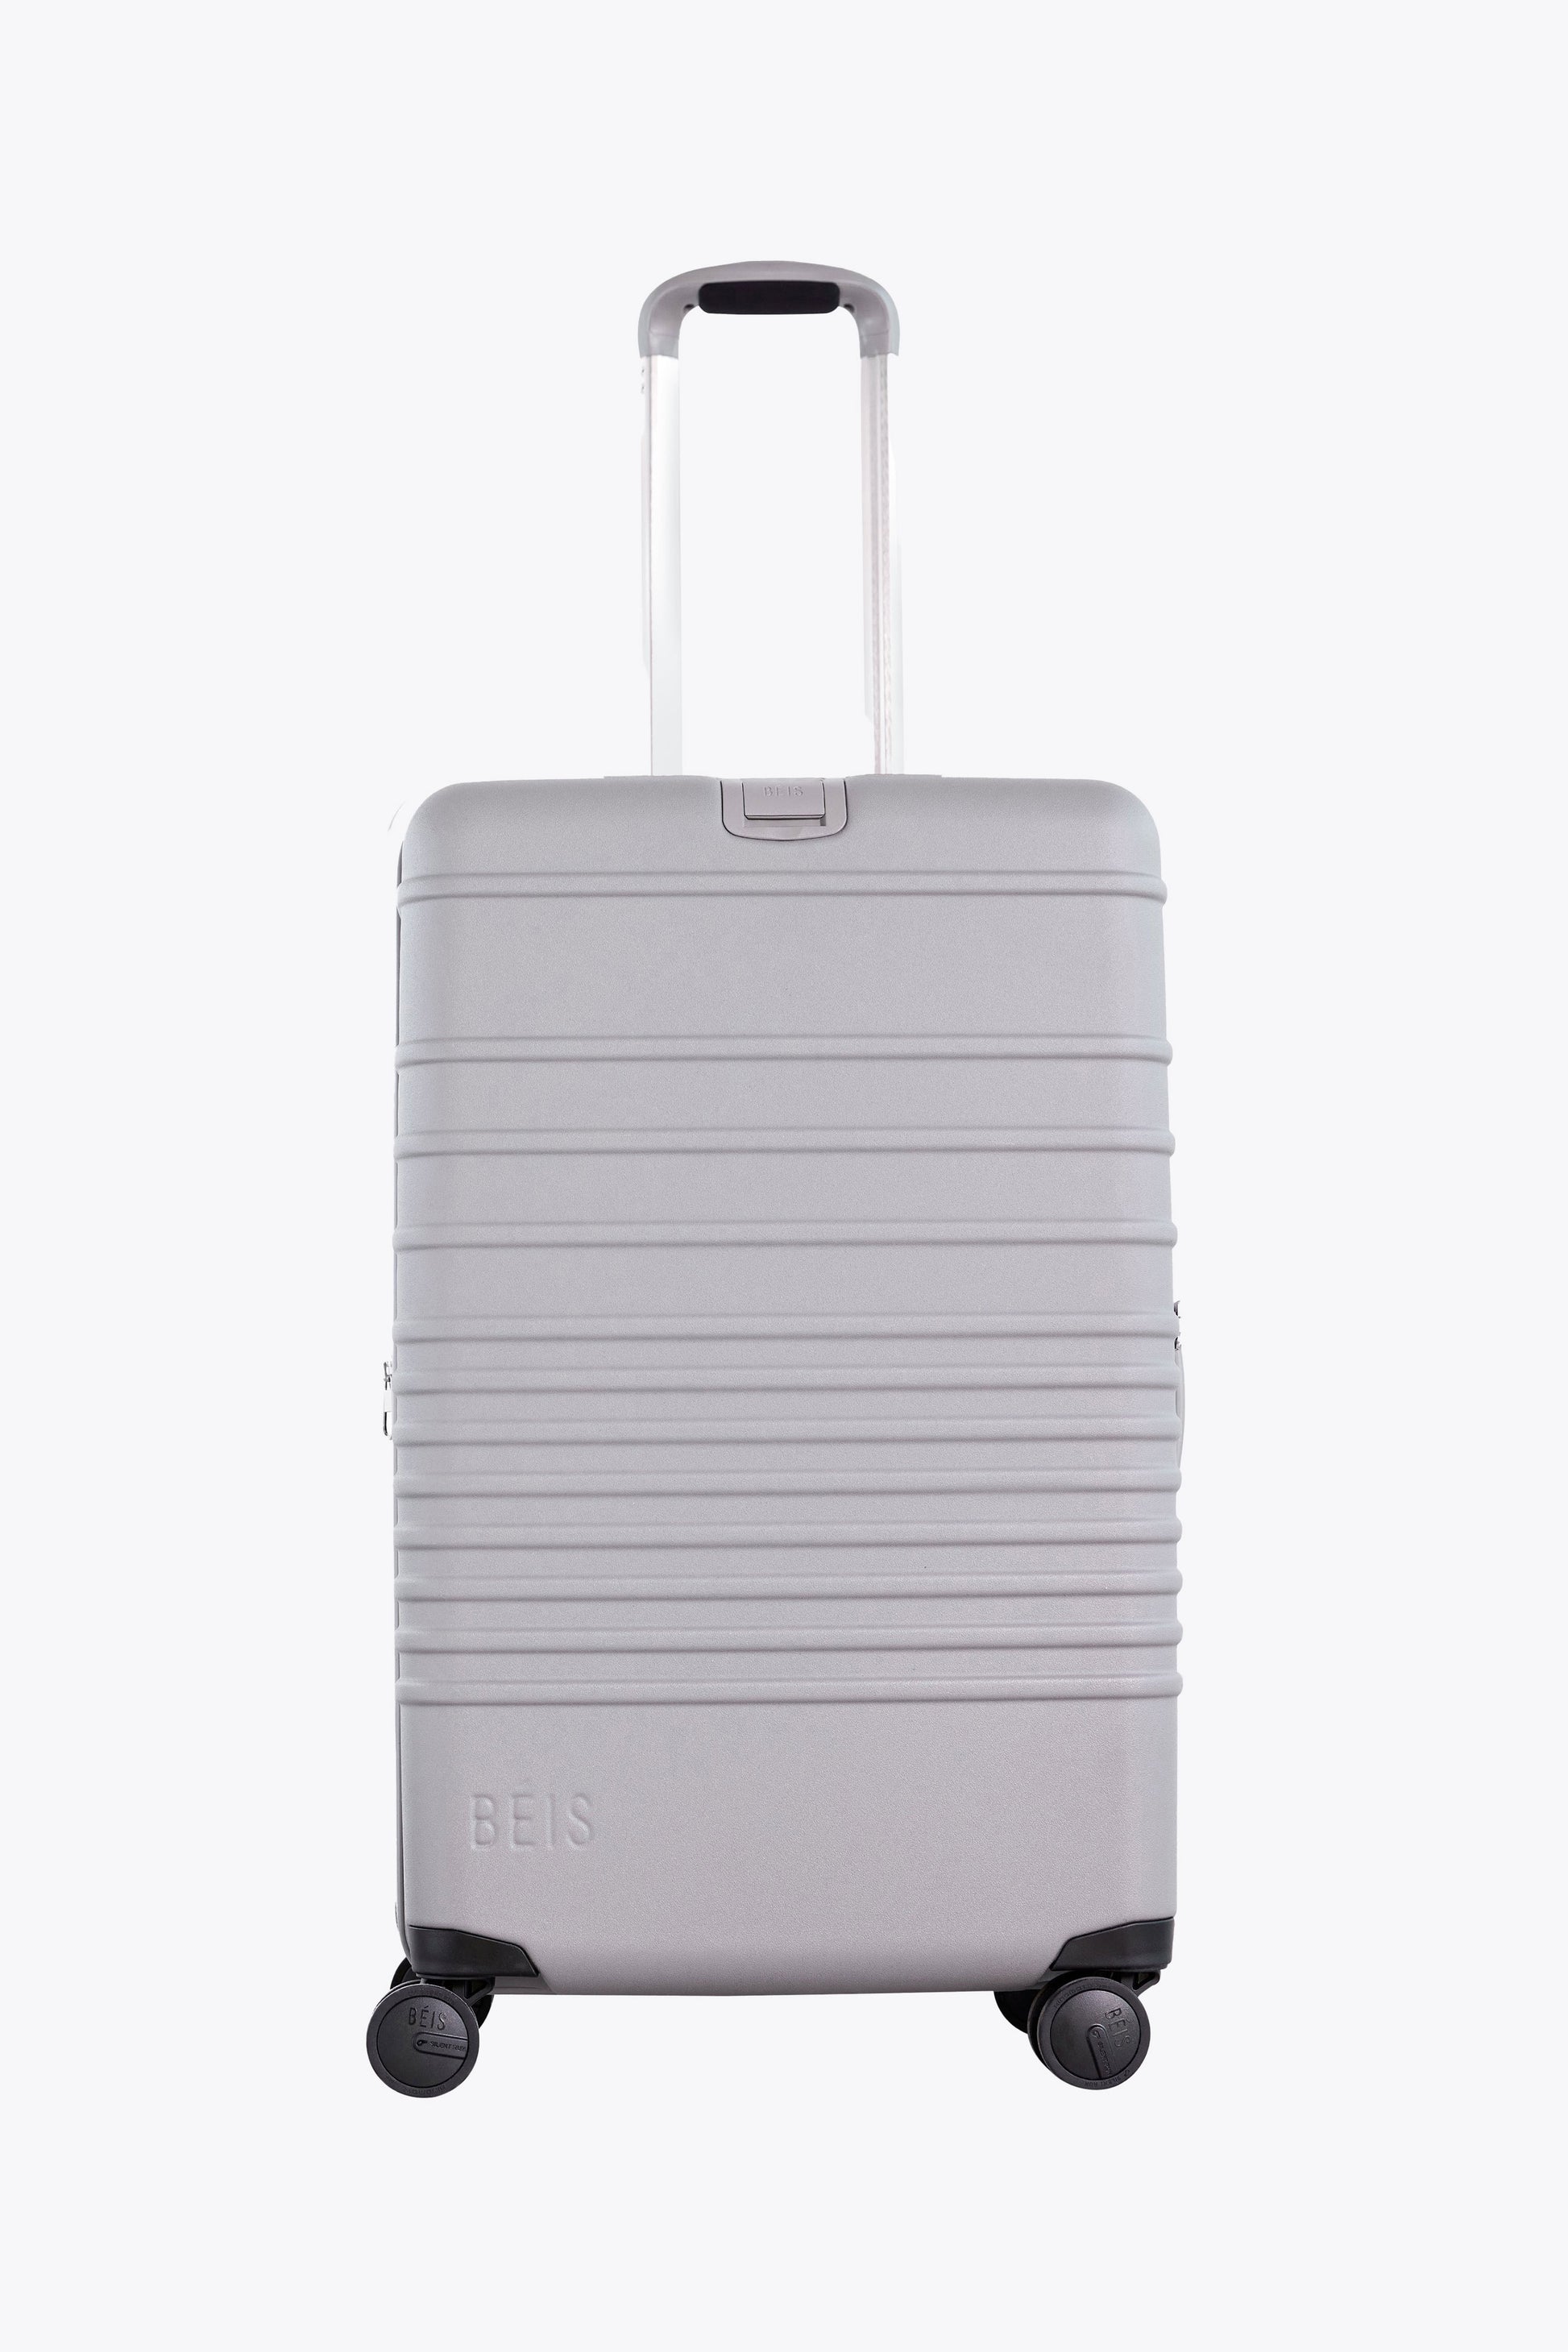 BÉIS 'The Medium Check-In Roller' in Grey - 26 Checked Baggage in Grey |  BÉIS Travel CA